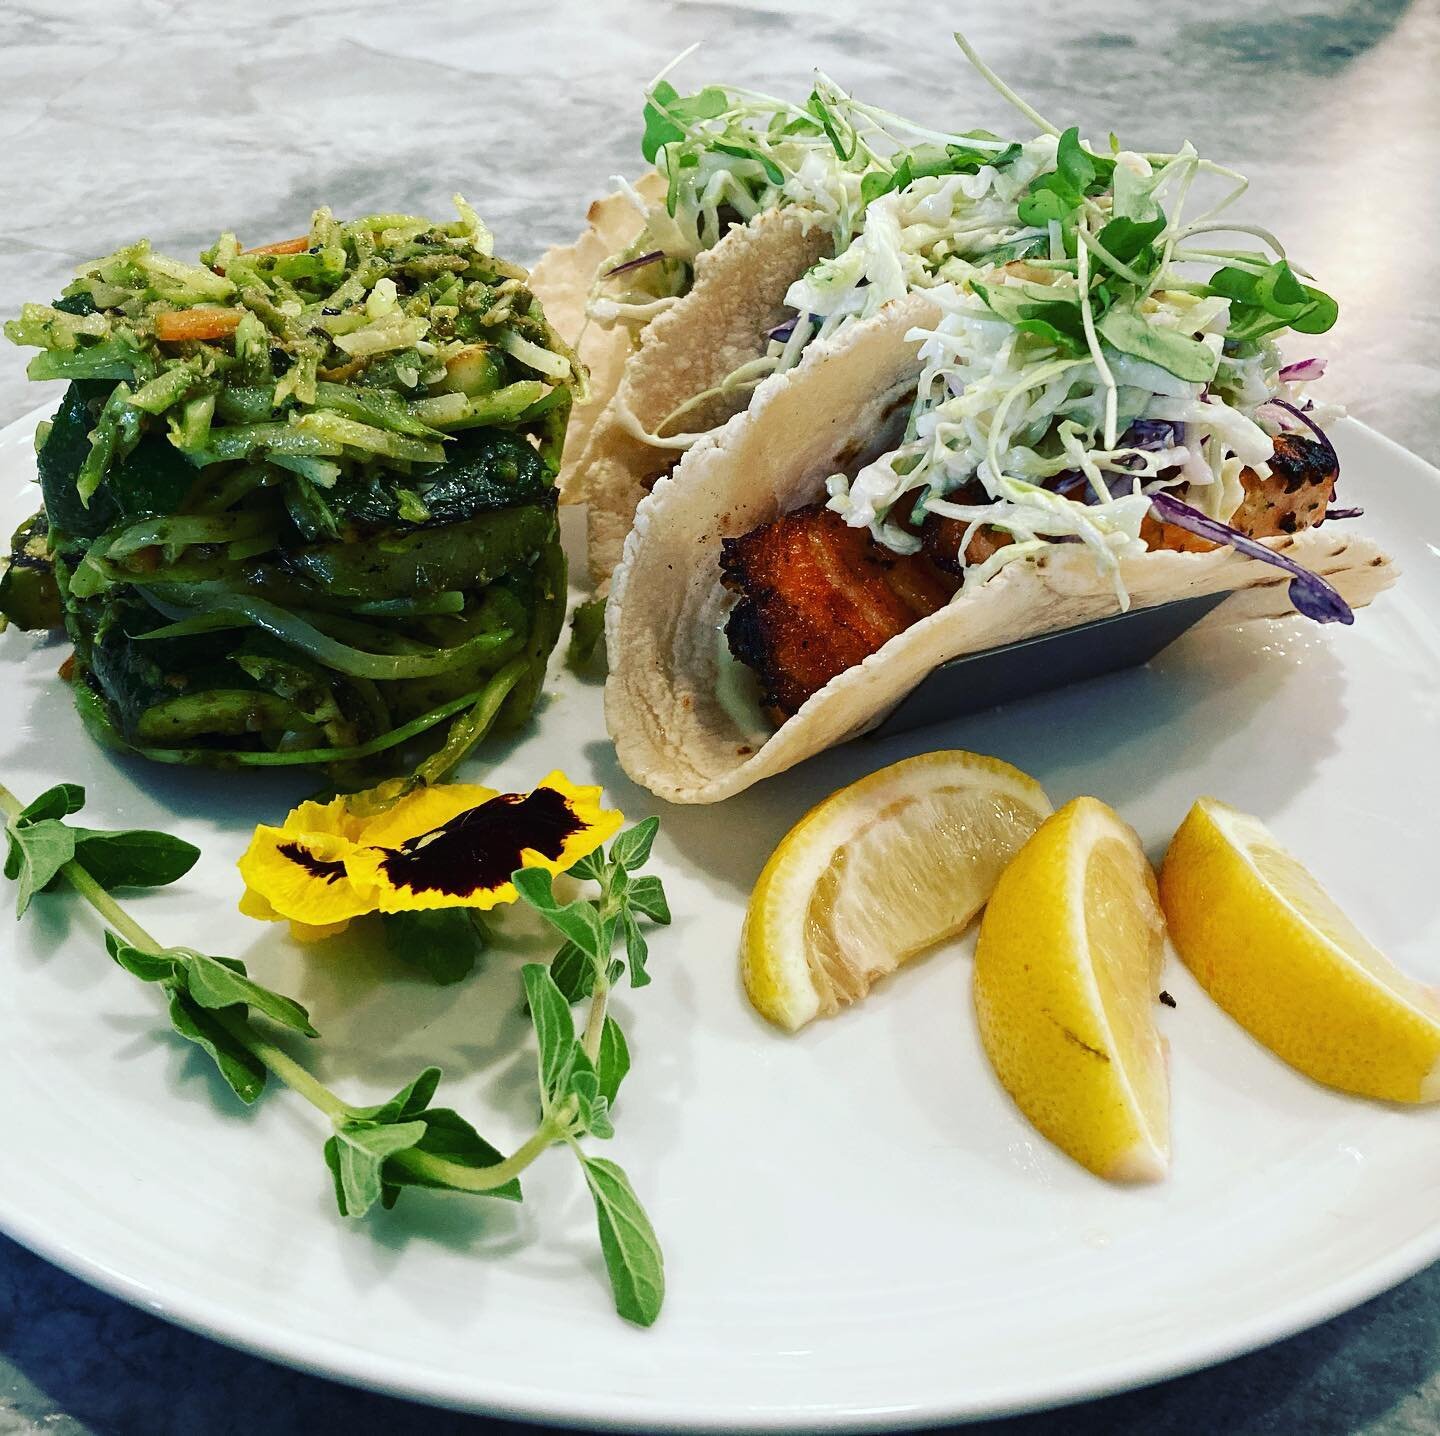 Salmon Tacos🌮🌮🌮
Basil mint pesto Grilled veg 🍽

Eat healthy 
Live strong
Take down some tacos 😆🤘